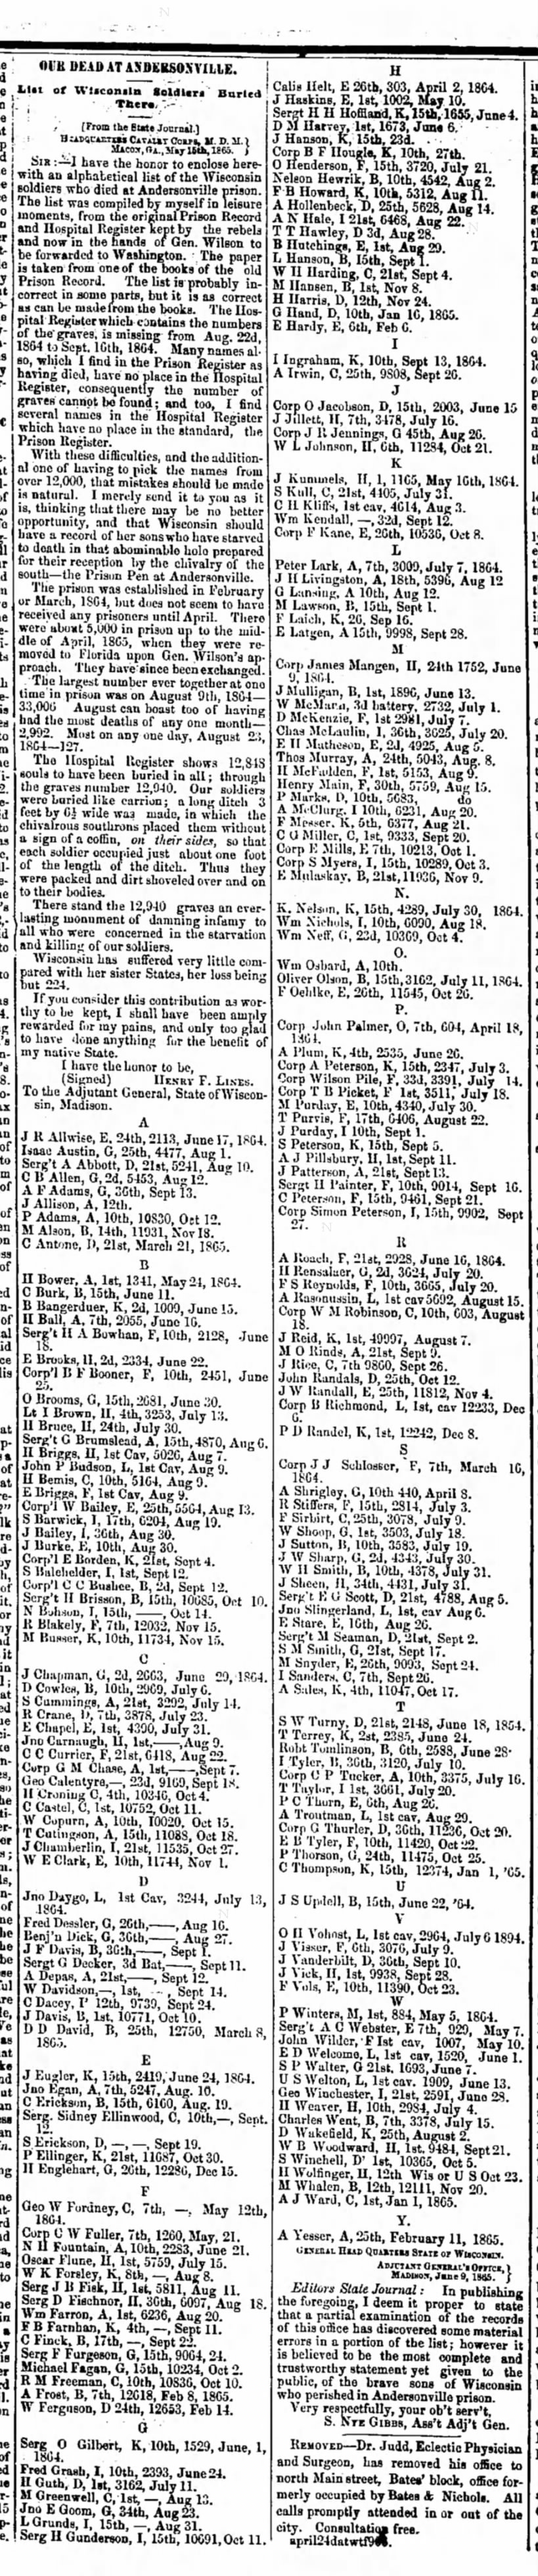 Wisconsin Soldiers Buried at Andersonville, first report